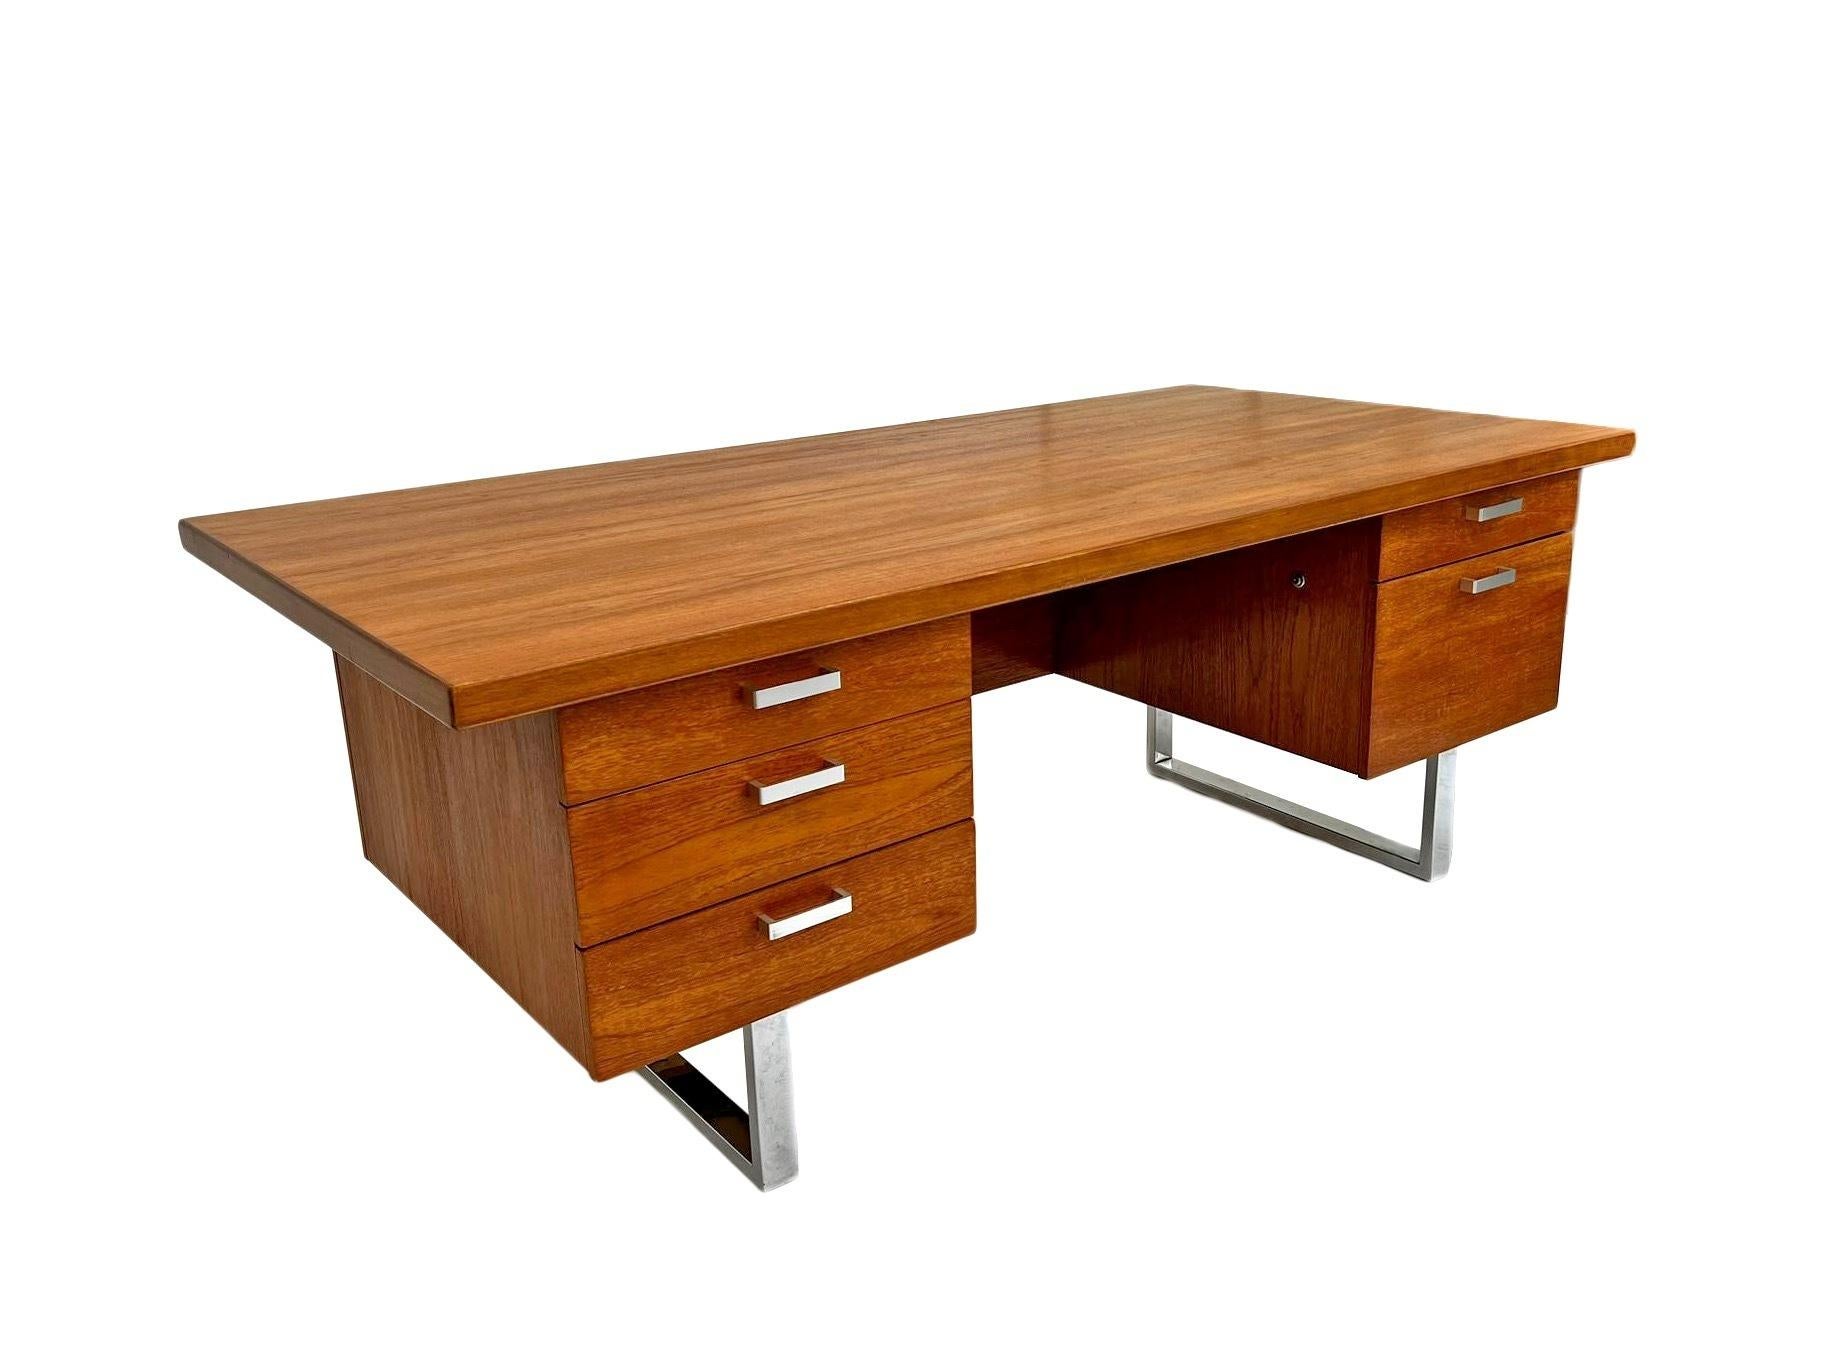 A beautiful British teak and chrome ‘Prestige’ collection writing desk designed by Trevor Chinn and Ray Leigh for Gordon Russell in the 1970s, this would make a stylish addition to any work area. A striking piece of classically designed midcentury